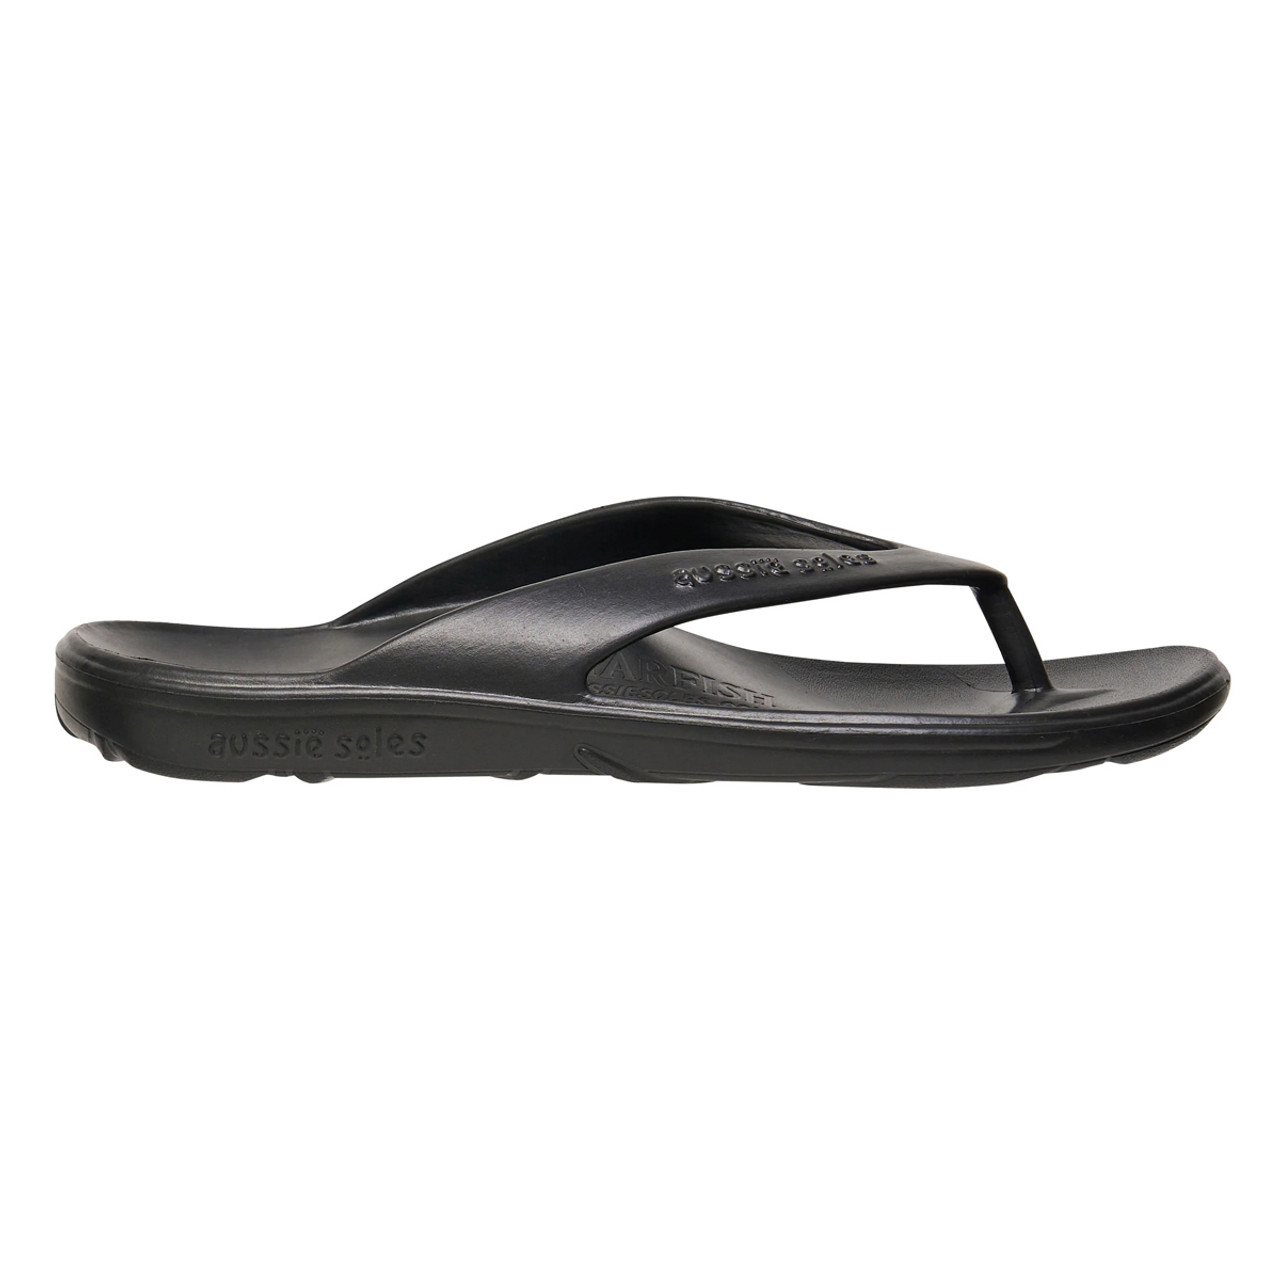 Aussie Soles Starfish 2.0 Arch Support Thongs - Black | Outdoors Warehouse